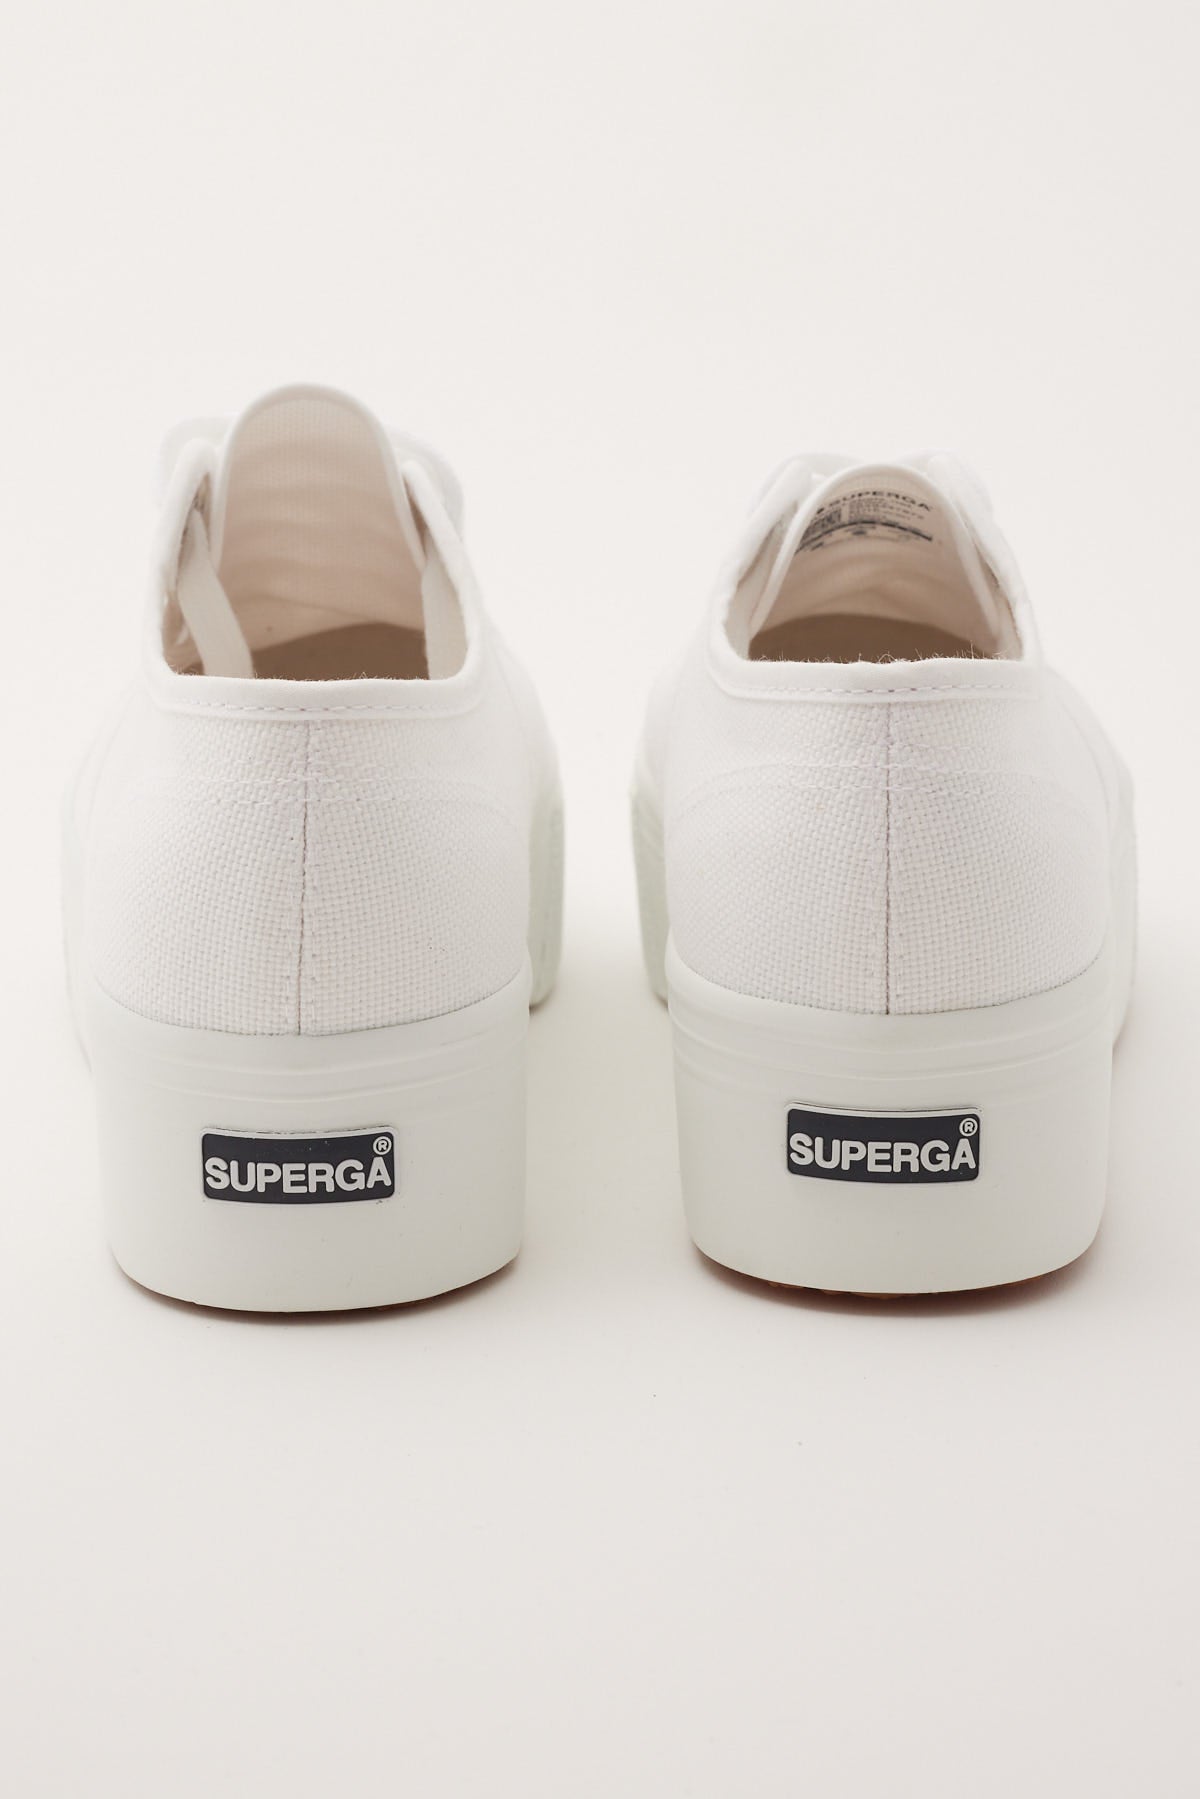 Superga 2790 Cotw Linea Up and Down White